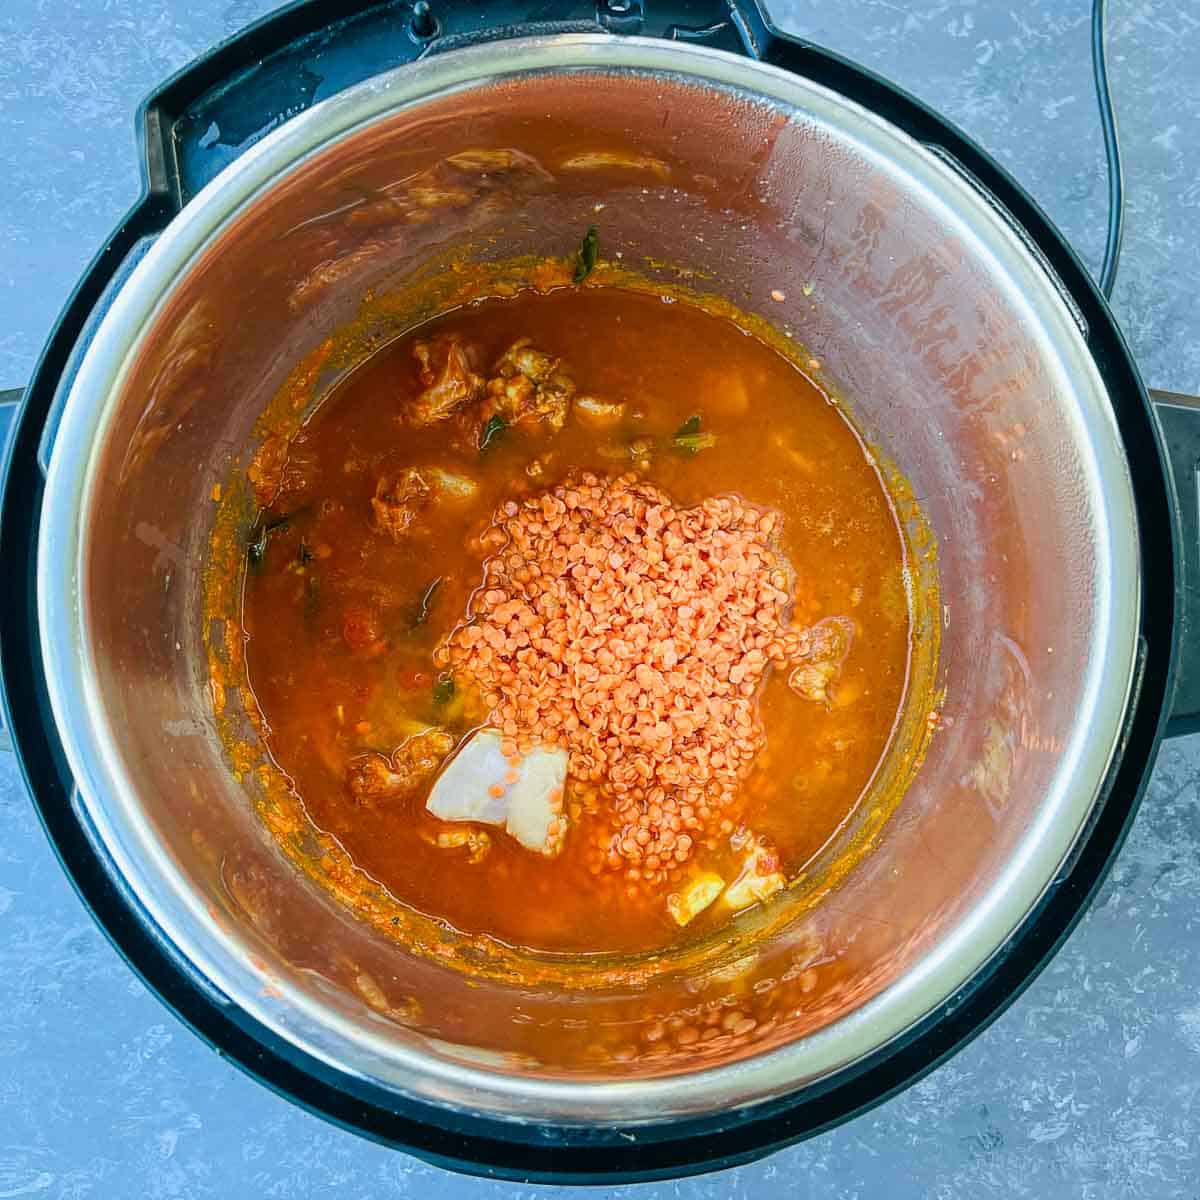 Red lentils and water added in the Instant Pot.